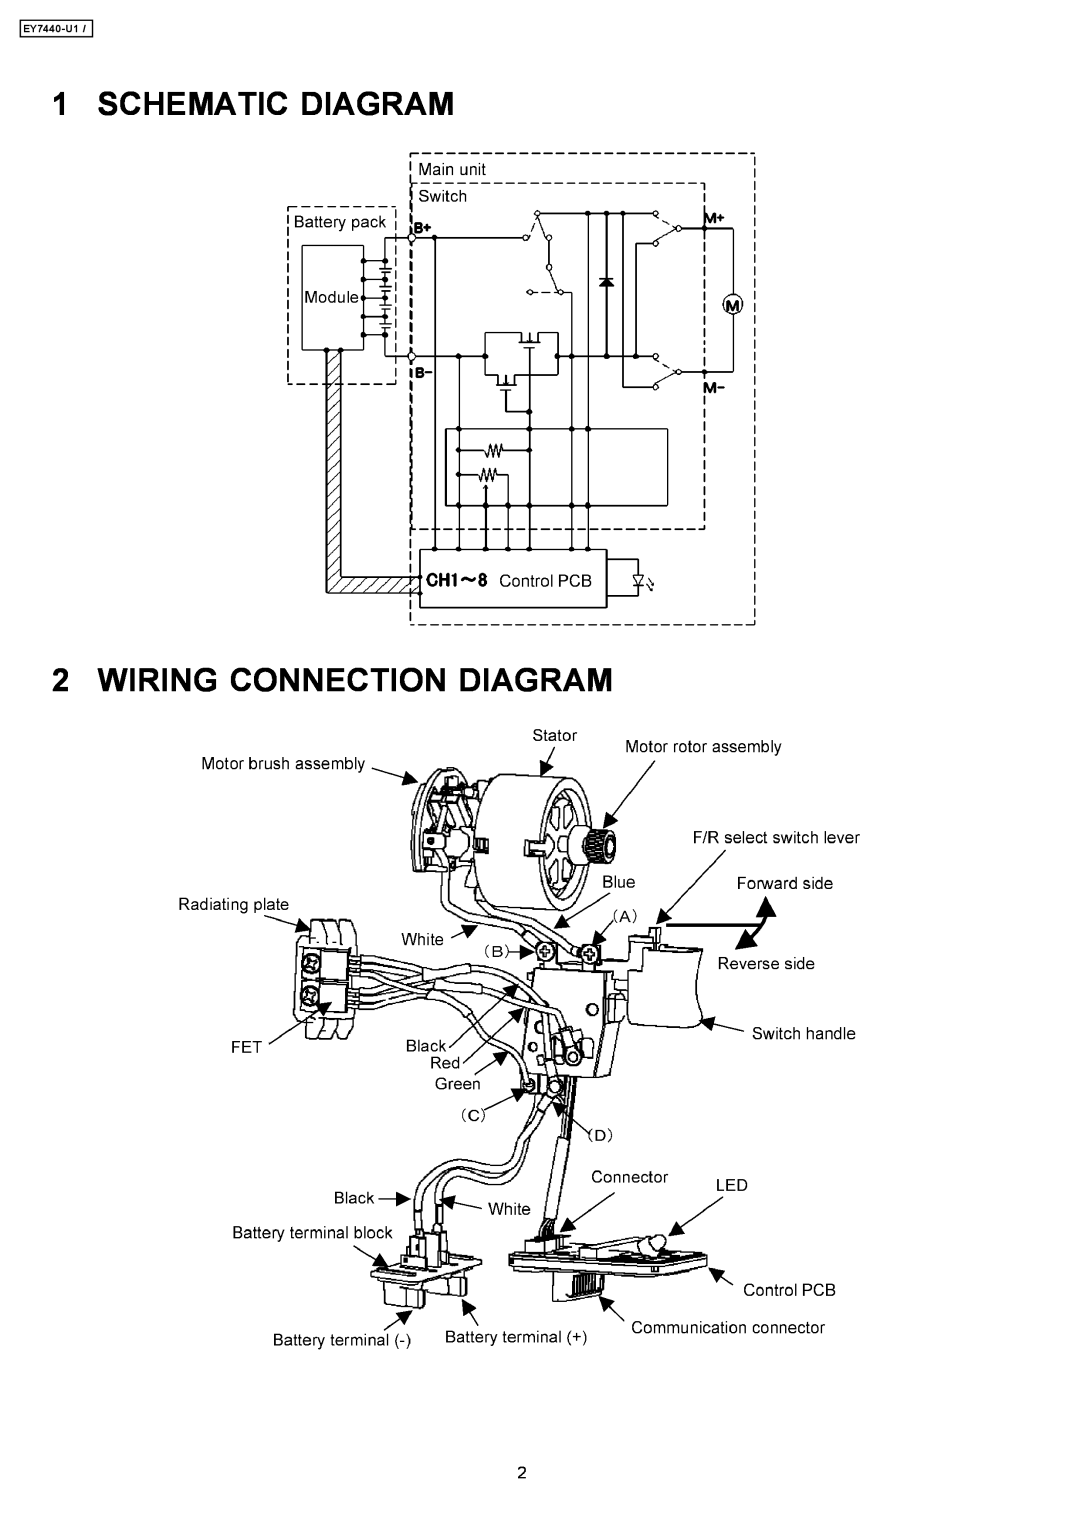 Panasonic EY7440-U1 specifications SCHEMATIC DIAGRAM 2 WIRING CONNECTION DIAGRAM 